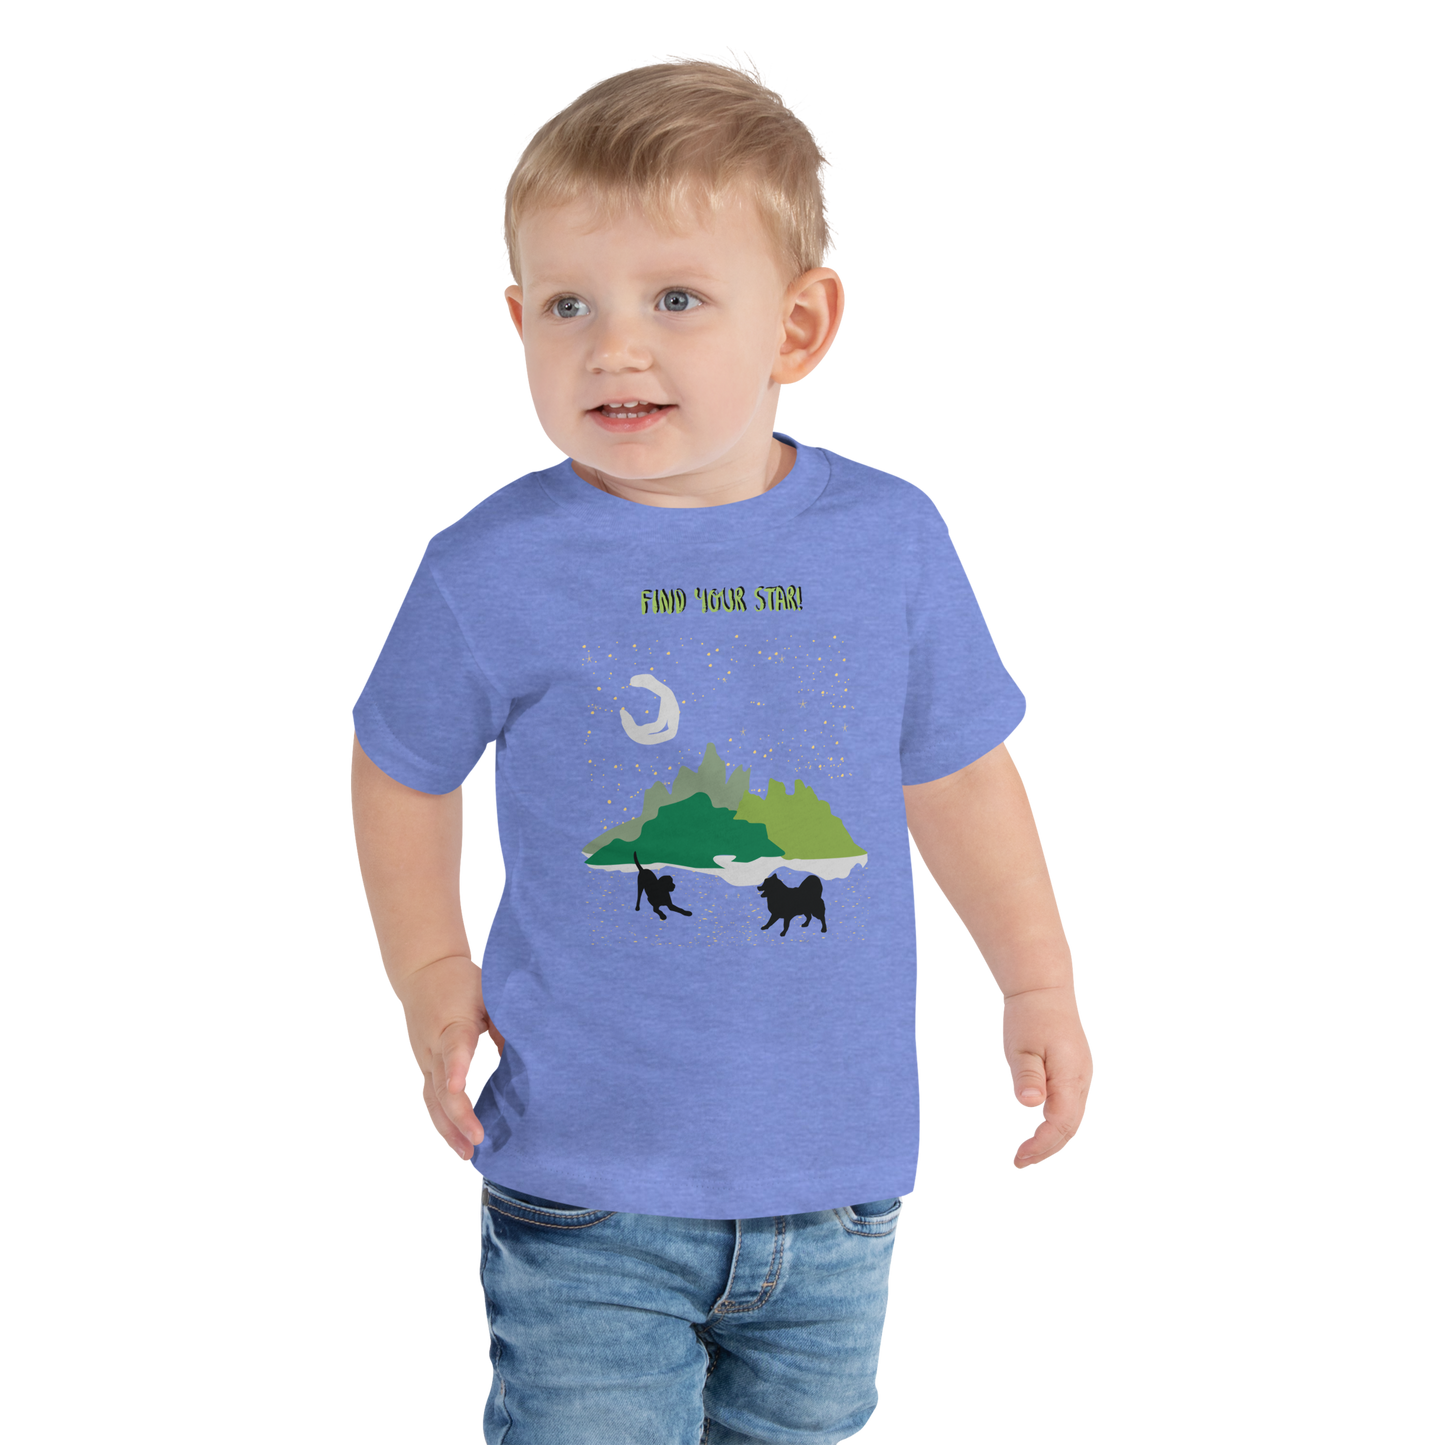 Find Your Star! Toddler Tee